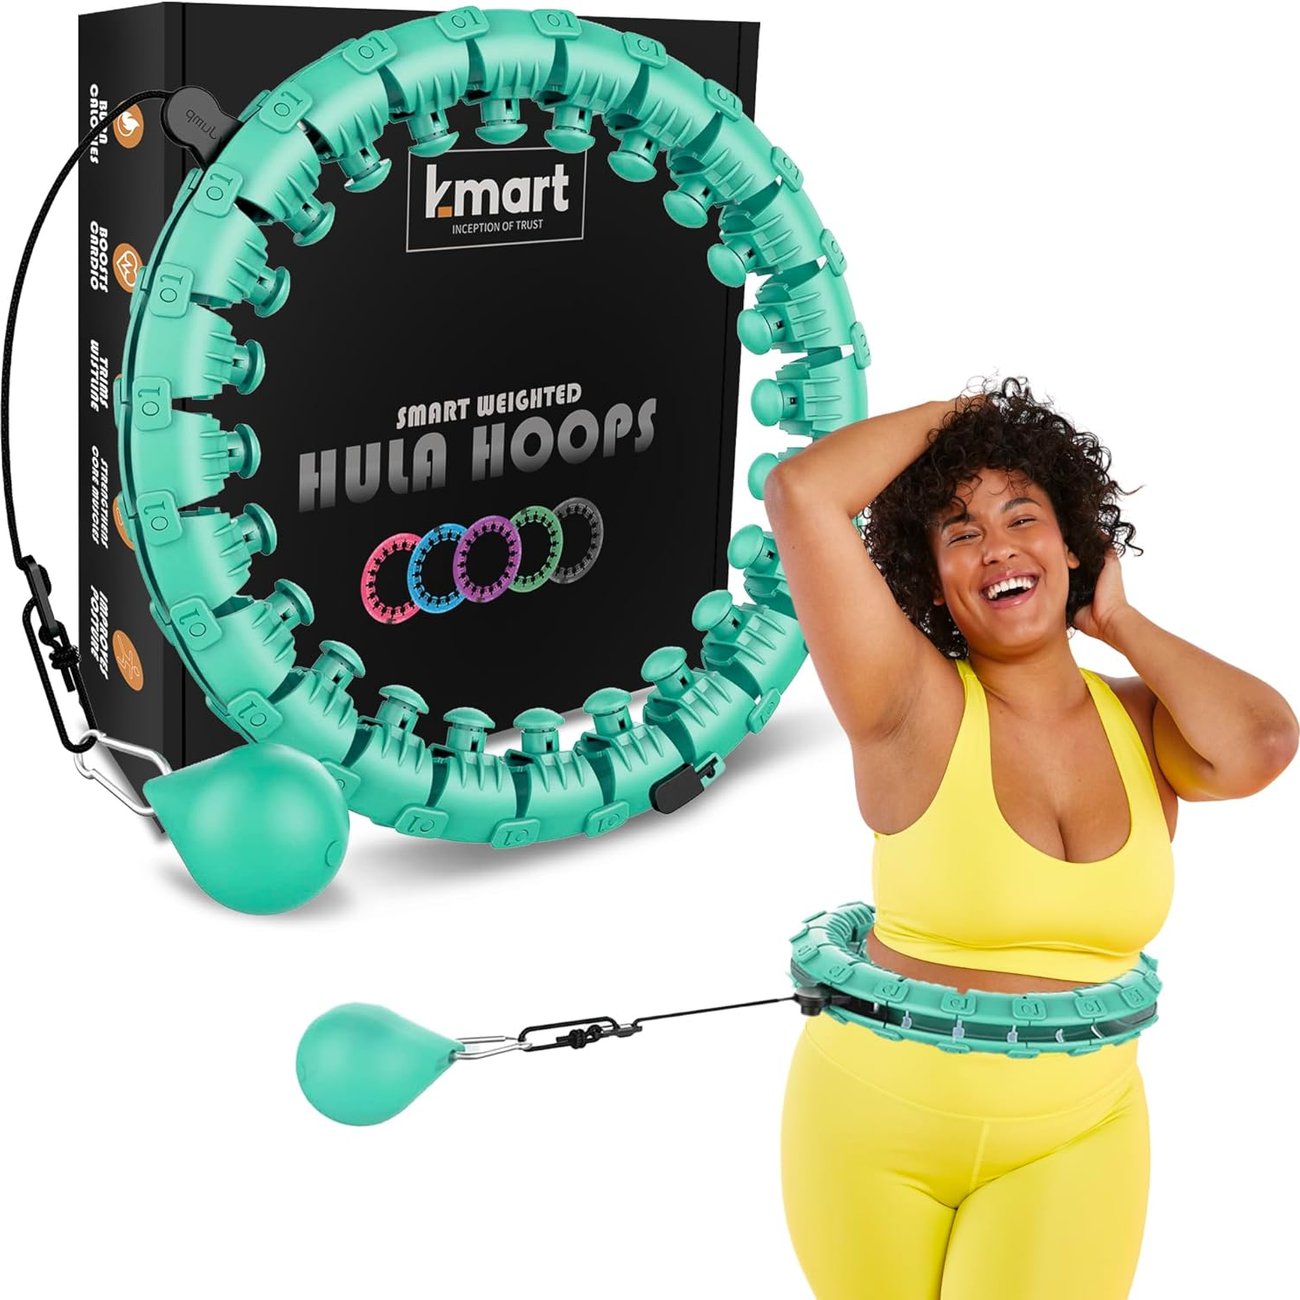 K-MART Smart Weighted Hula Ring Hoops